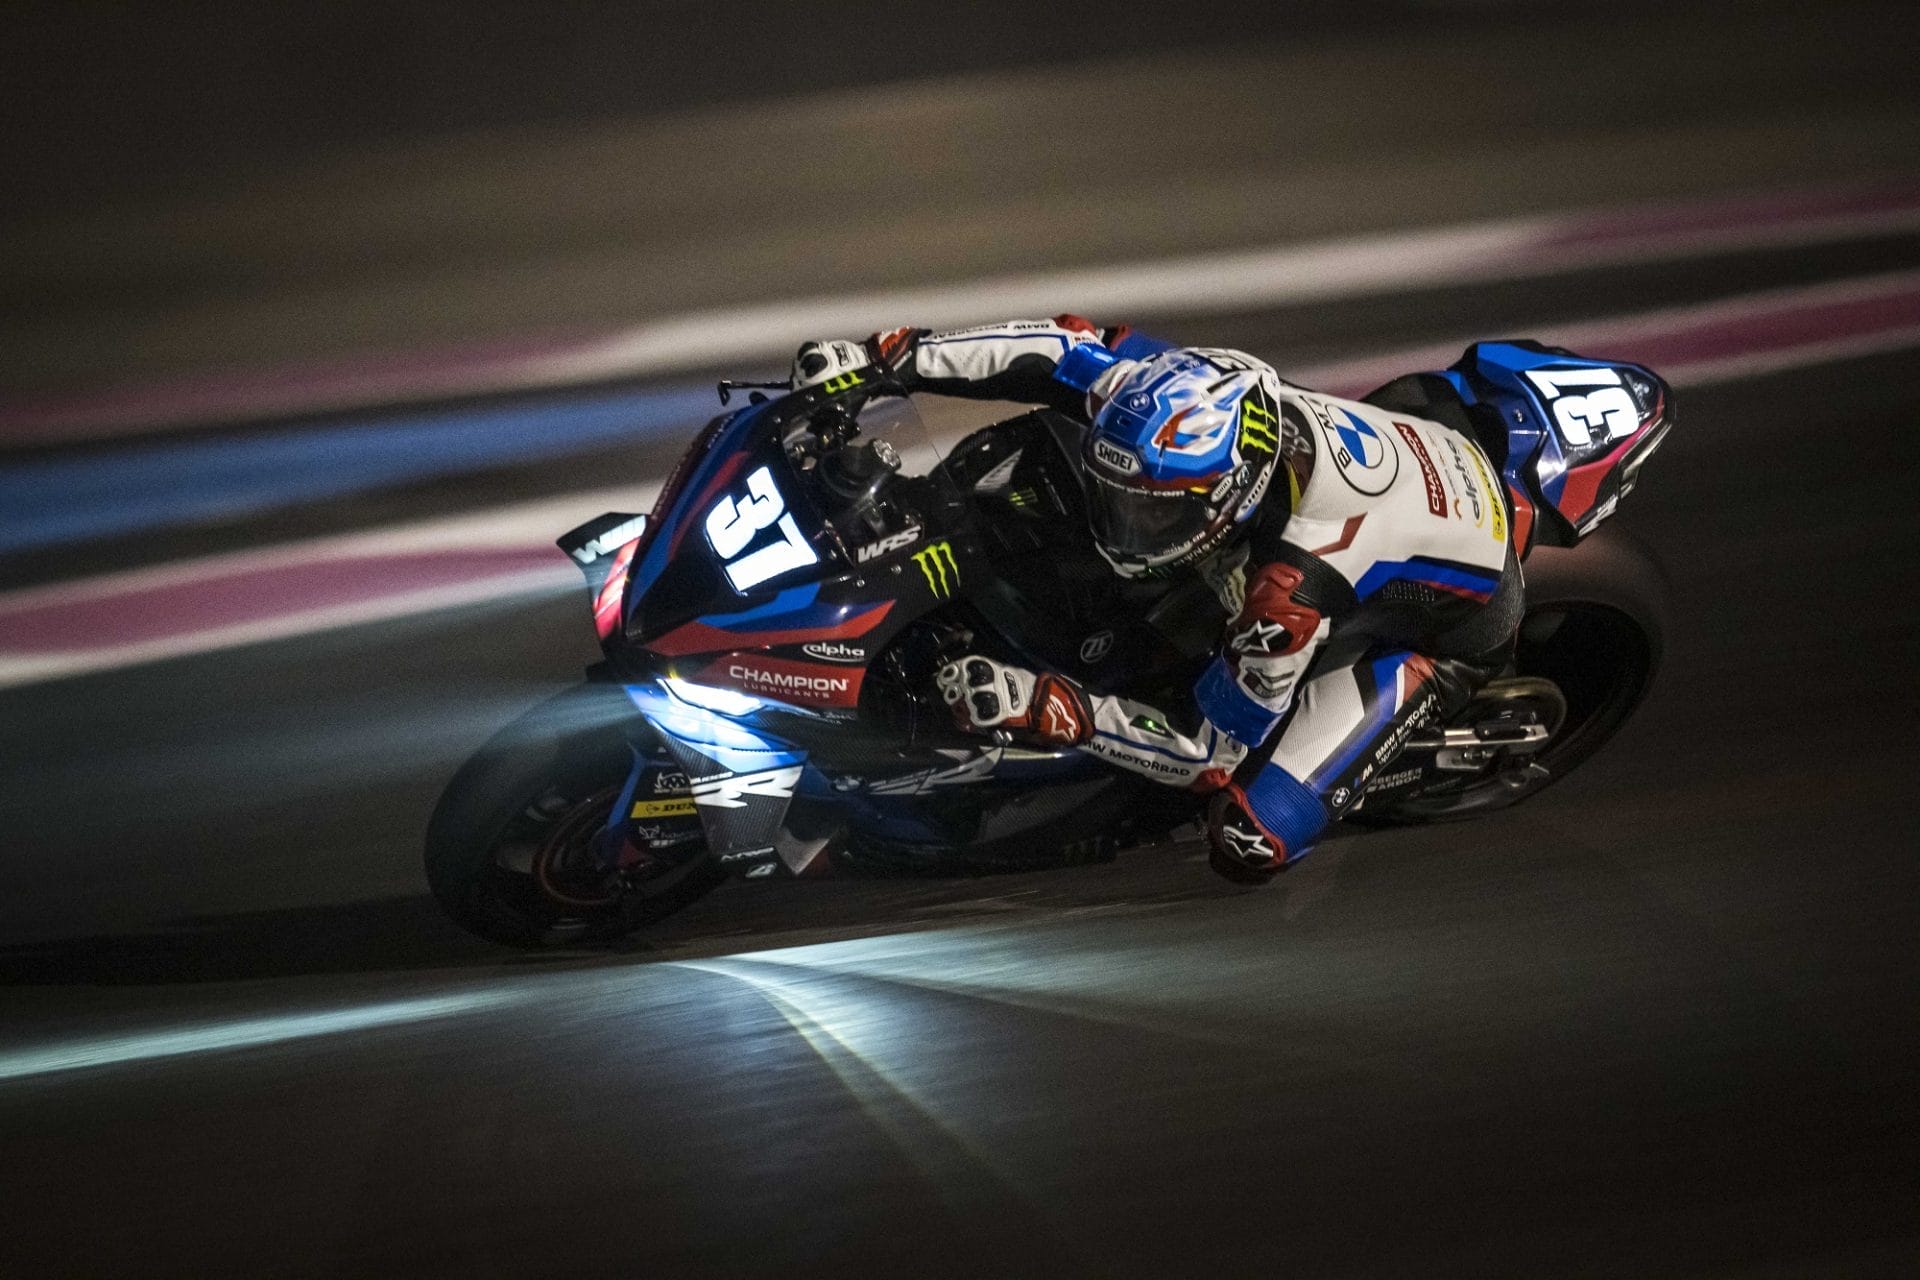 BMW Motorrad in the EWC: New season, proven team and exciting newcomer